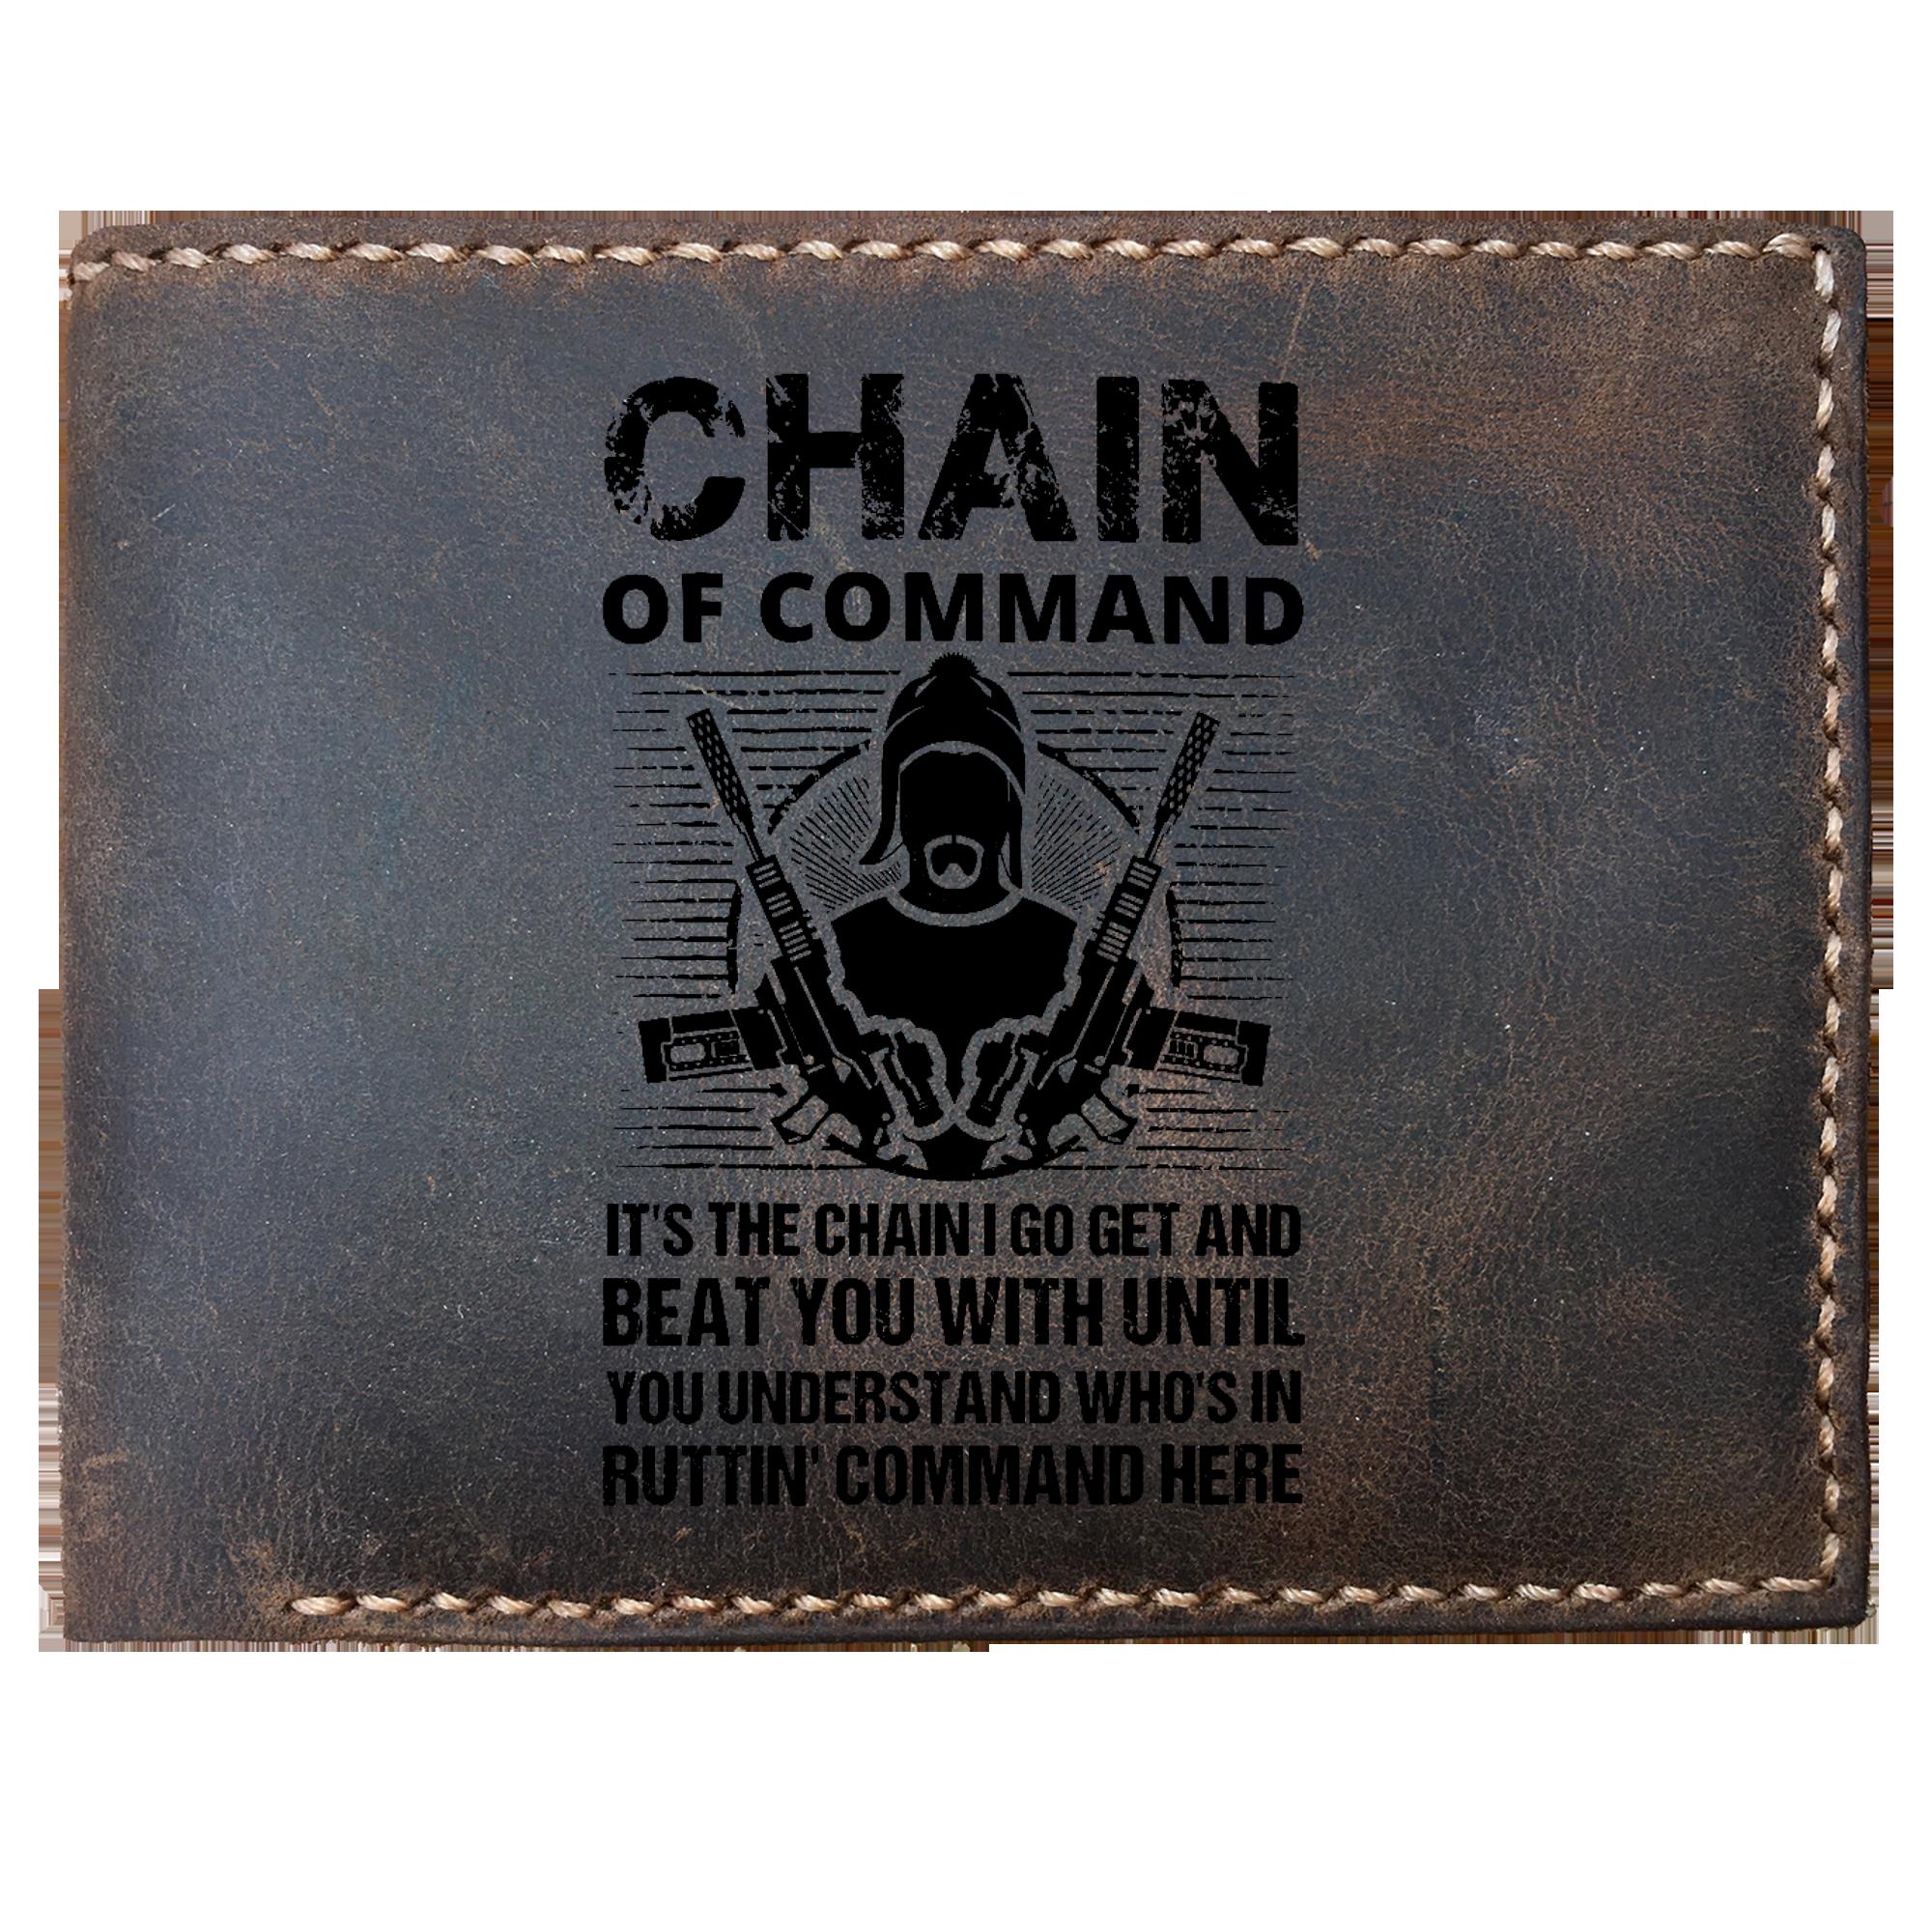 Skitongifts Funny Custom Laser Engraved Bifold Leather Wallet For Men, Firefly Serenity Chain Of Command Funny